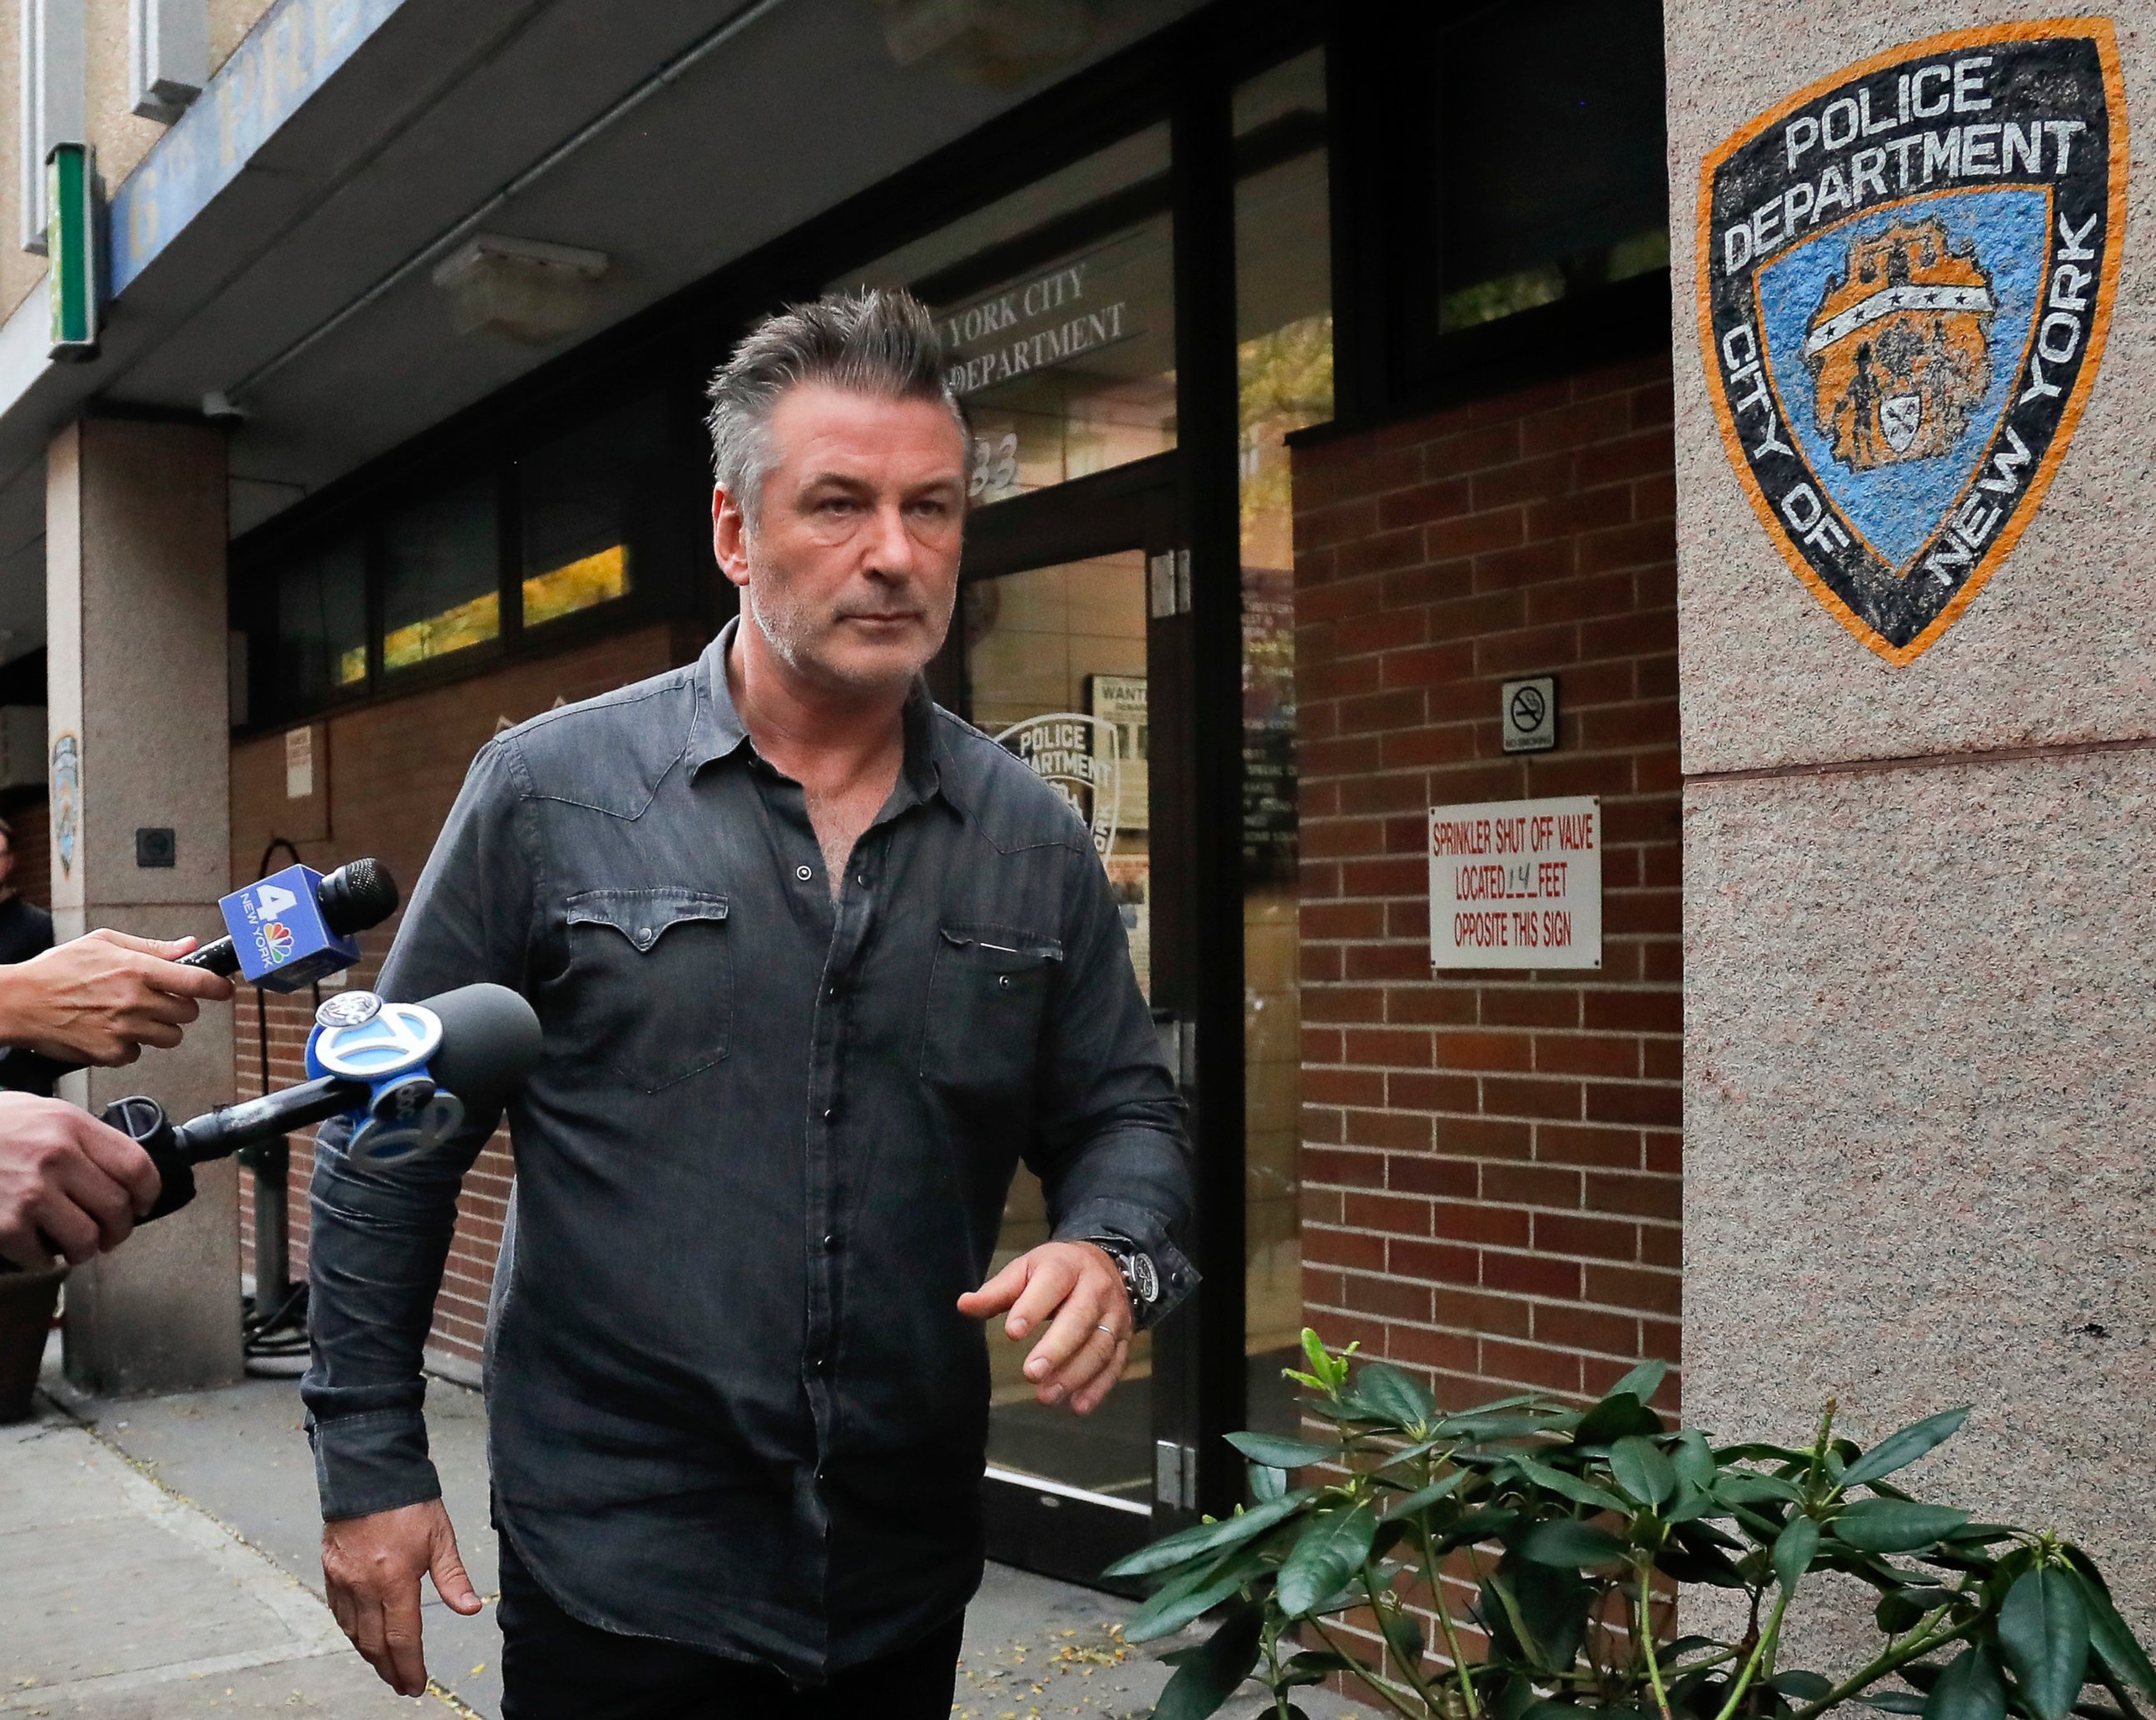 PHOTO: In this Nov. 2, 2018, file photo, actor Alec Baldwin walks out of the New York Police Department's 10th Precinct, in New York, after he was arrested for allegedly punching a man during a dispute over a parking spot, authorities said.